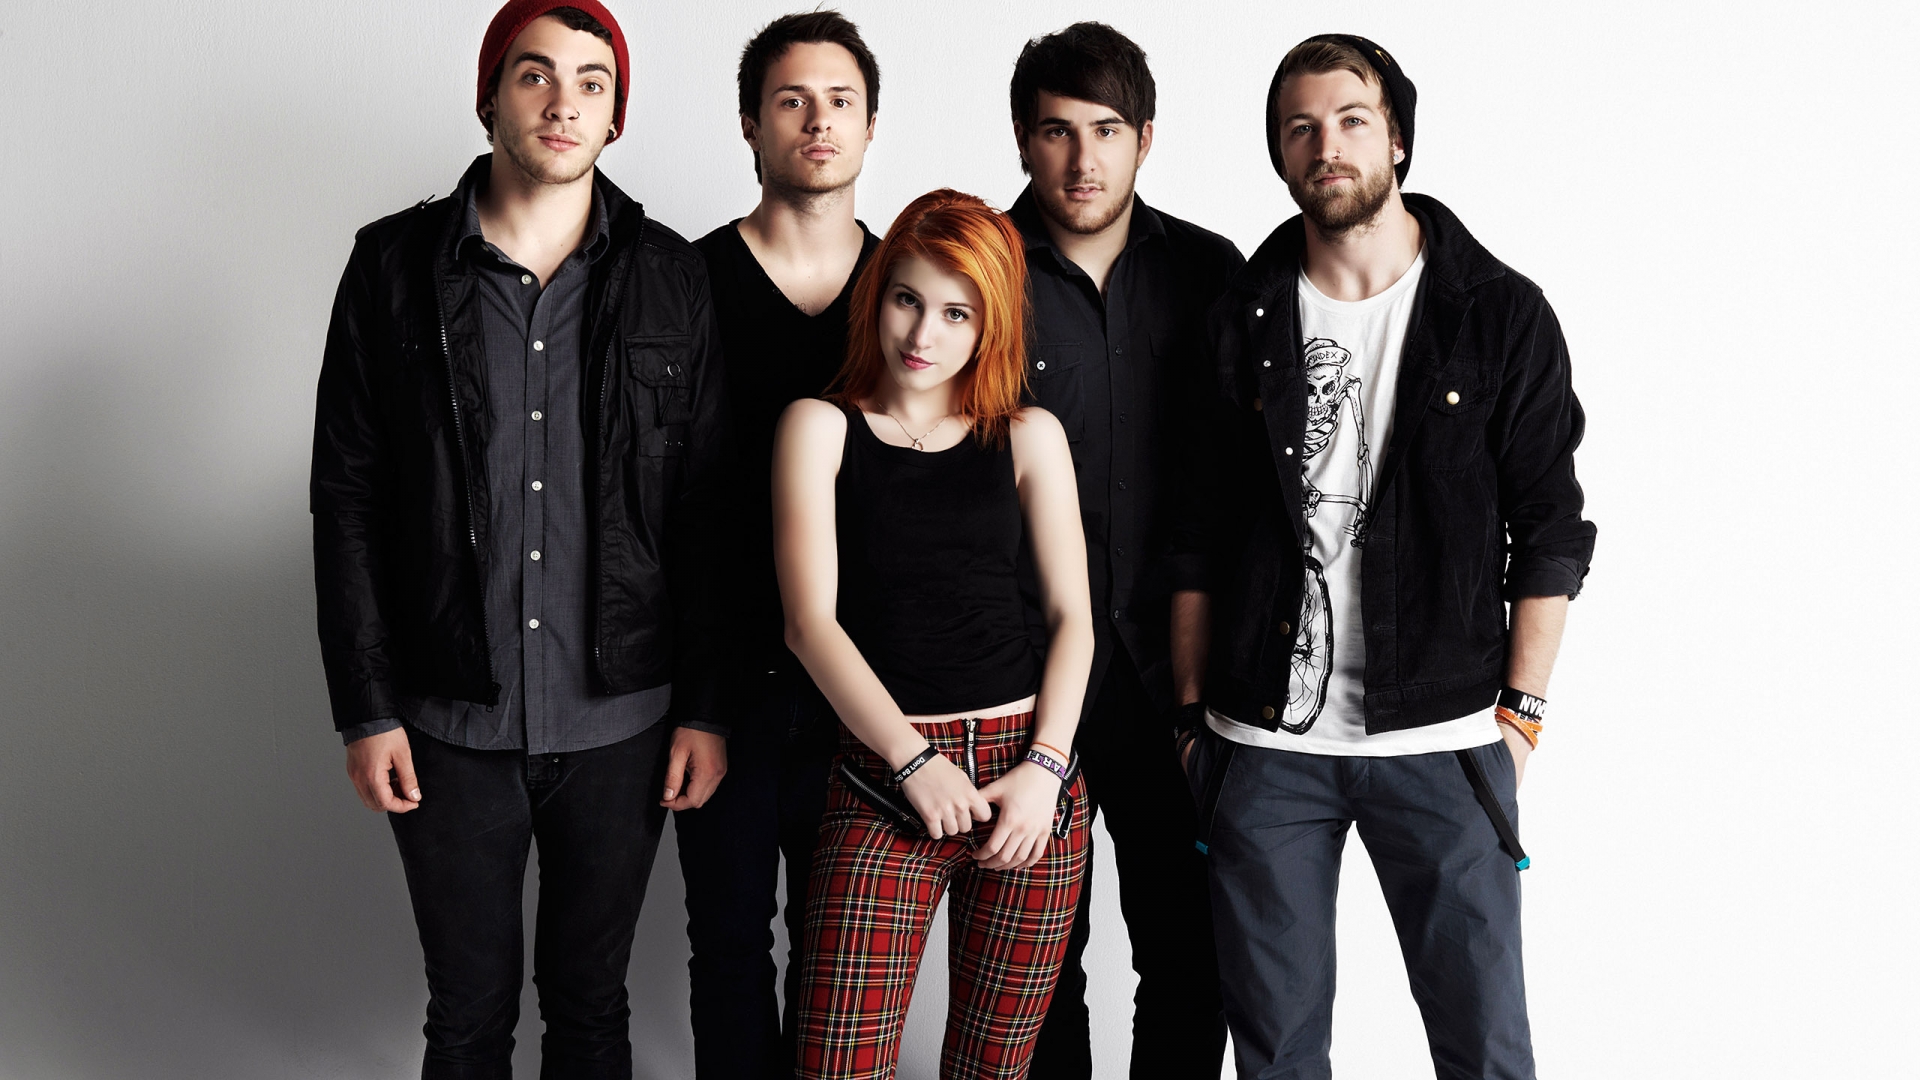 Hayley Williams and Paramore for 1920 x 1080 HDTV 1080p resolution